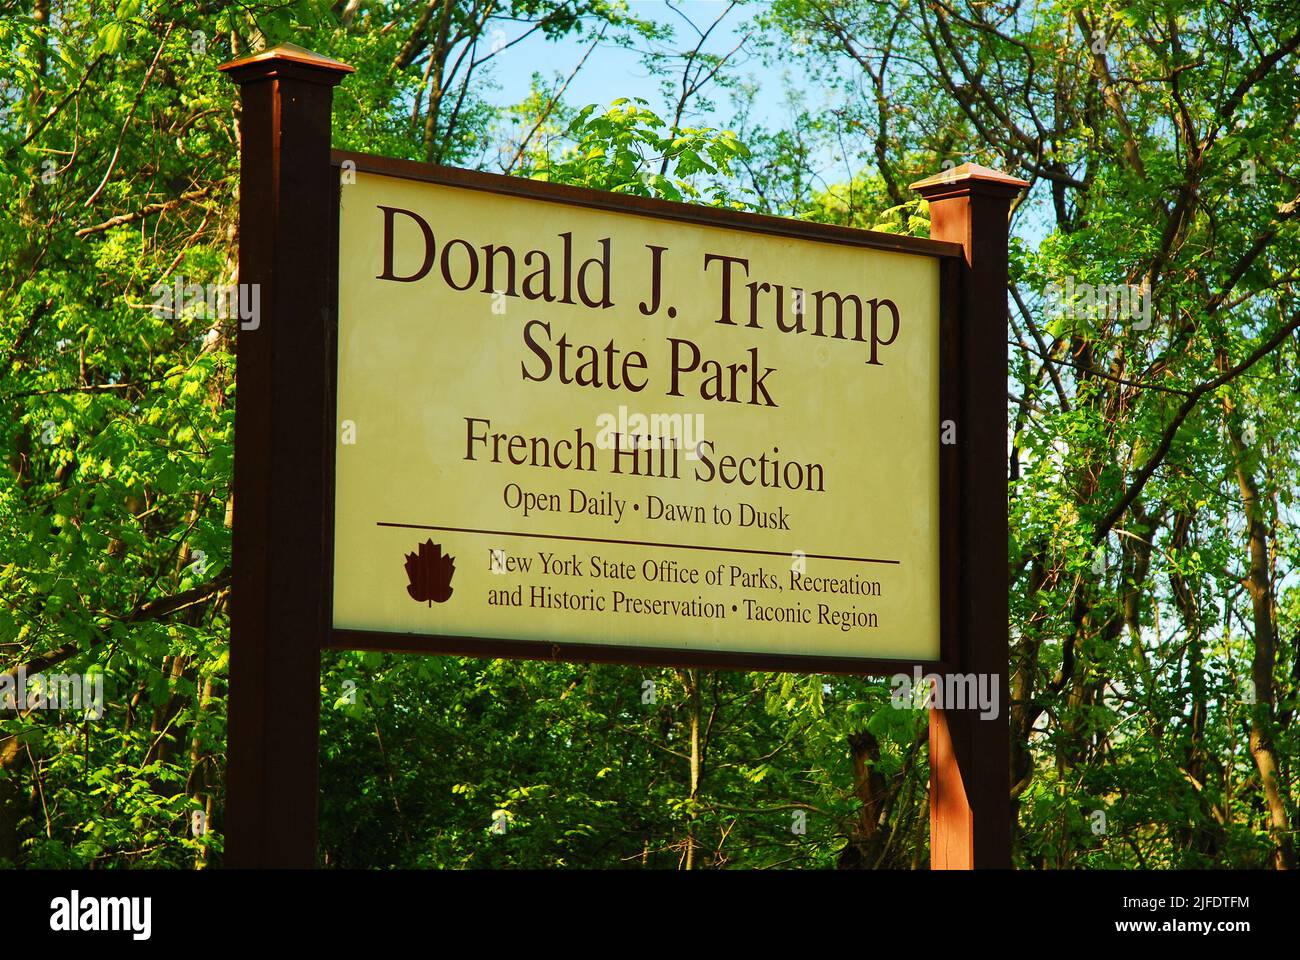 Donald J Trump State Park was named prior to becoming President and was land he sold to the State Park department of New York Stock Photo